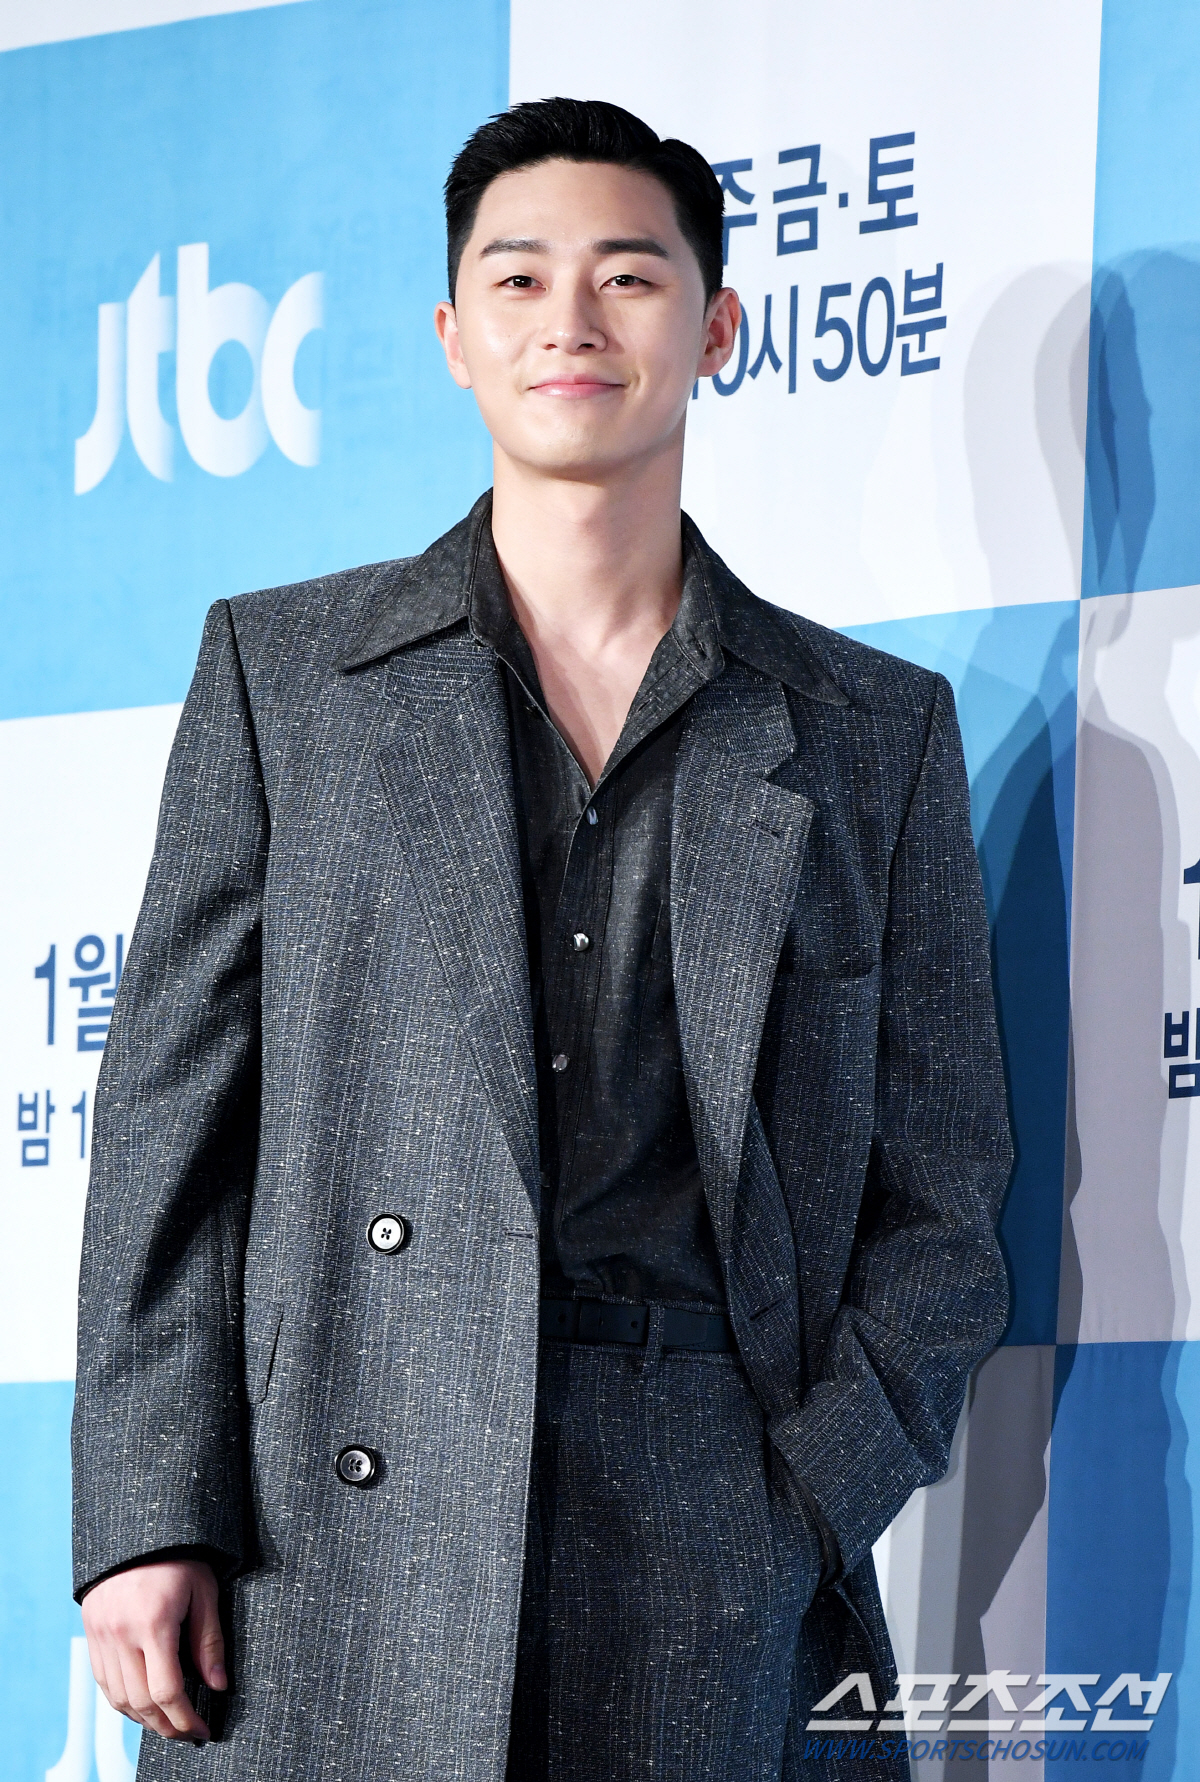 Actor Park Seo-joon has shown affection for youth water.On the afternoon of the 30th, JTBCs new gilt drama Itaewon Clath (directed by Jo Kwang-jin, directed by Kim Seong-yoon) was presented at the Conrad Hotel in Yeouido, Yeongdeungpo-gu, Seoul.The event was attended by Park Seo-joon, Kim Dae-mi, Yoo Jae-myeong, Kwon Na-ra, Kim Seong-yoon PD, and Jo Kwang-jin.Park Seo-joon was a toxic actor in Youth Water, so he said, I do not think I liked youths and did not Choices.I think I am enjoying a lot of works that express my youth because of Yi Gi.This work also had a lot of fun with the original work rather than Choices because of the role of youth, and the role of new is very attractive in the original work, and I was wondering what I would like to express.That didnt mean I wanted to do it, but I think the coach offered me a suggestion that would give me this opportunity.I am trying to do well in this one, and I would like you to have fun. Itaewon Clath is a drama that moved Web toon Itaewon Clath, which was evaluated as a story of youths living in an absurd world, to the CRT. Park Seo-joon, who was constantly mentioned in the virtual casting stage, joined the characters and raised the expectation of viewers.In particular, Kim Seong-yoon PD, who was recognized for his sensual production through Gurmigreen Moonlight and Discovery of Love, grabbed a megaphone and wrote directly by Jo Kwang-jin, author of Web toon.Here, expectations are gathered as the first drama that the production company Showbox, which showed many movies with both workability and popularity such as Taxi Driver, Assassination and Tunnel, will show.It will be broadcast first at 10:50 p.m. on the 31st.